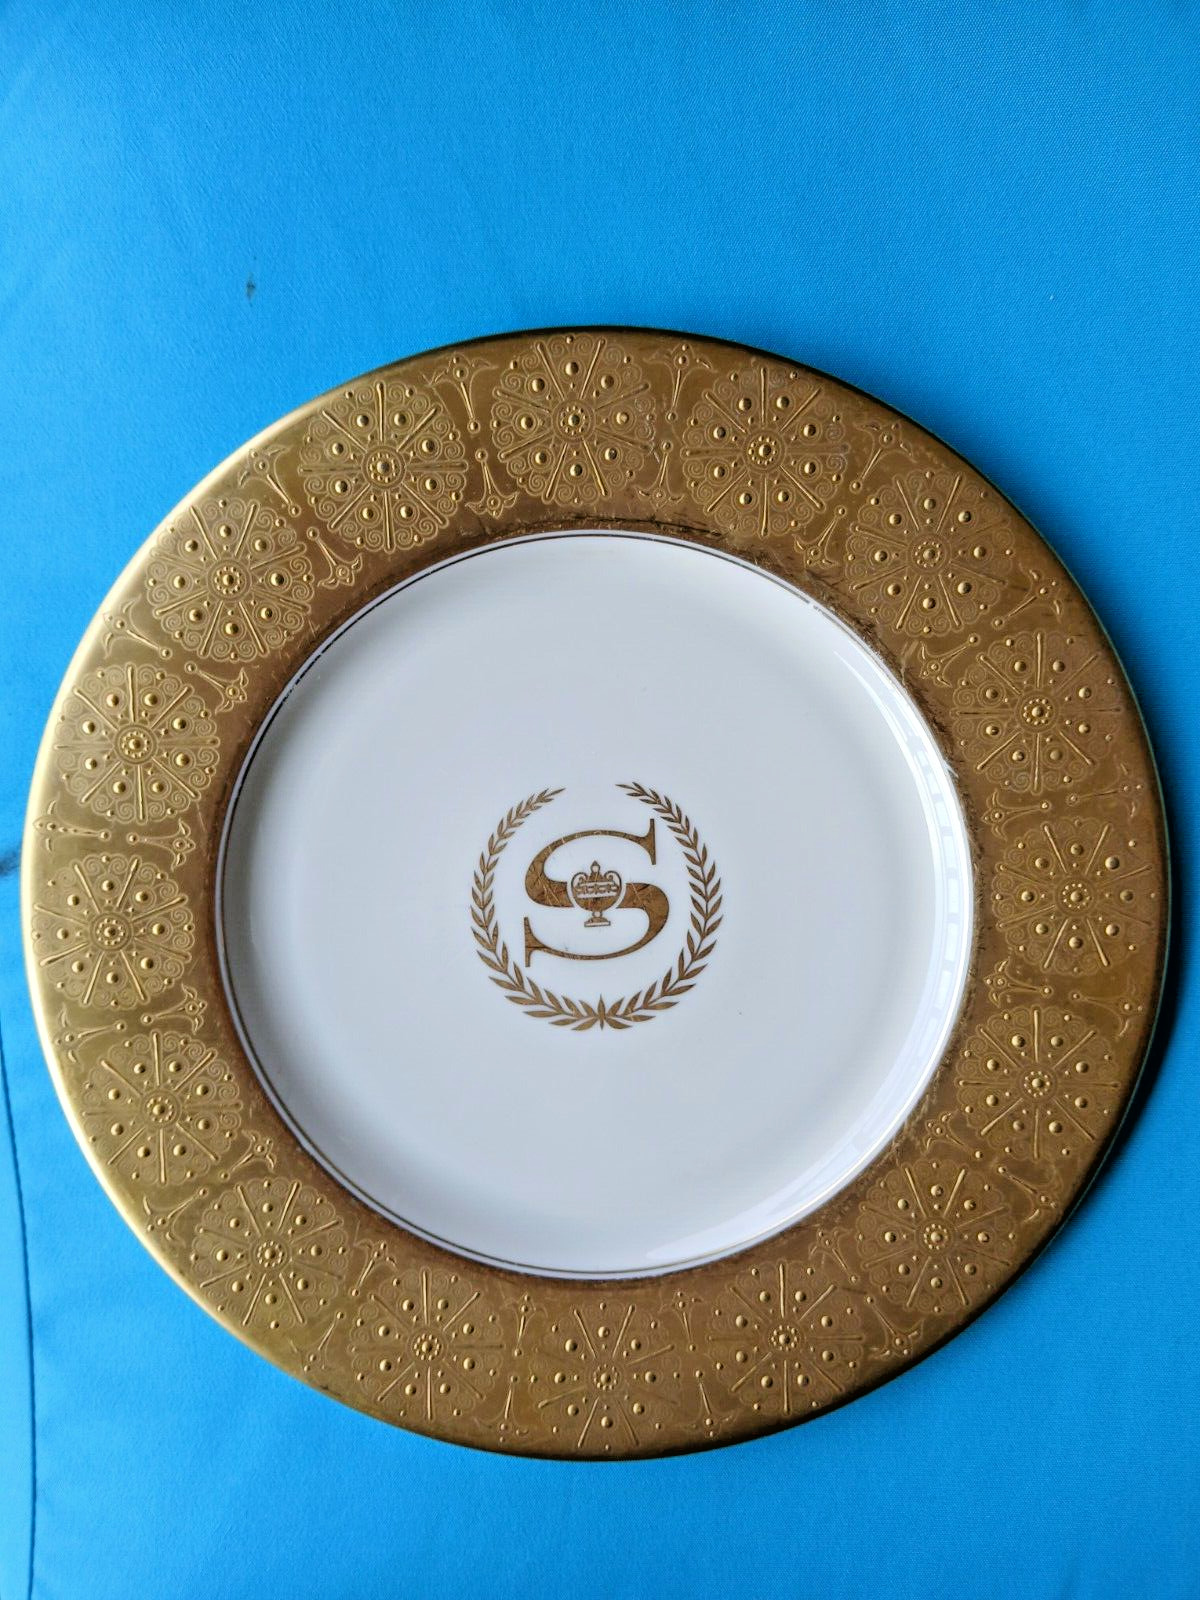 Vtg sheraton hotel gold service charger plate 10 3/4 inches castelton studios